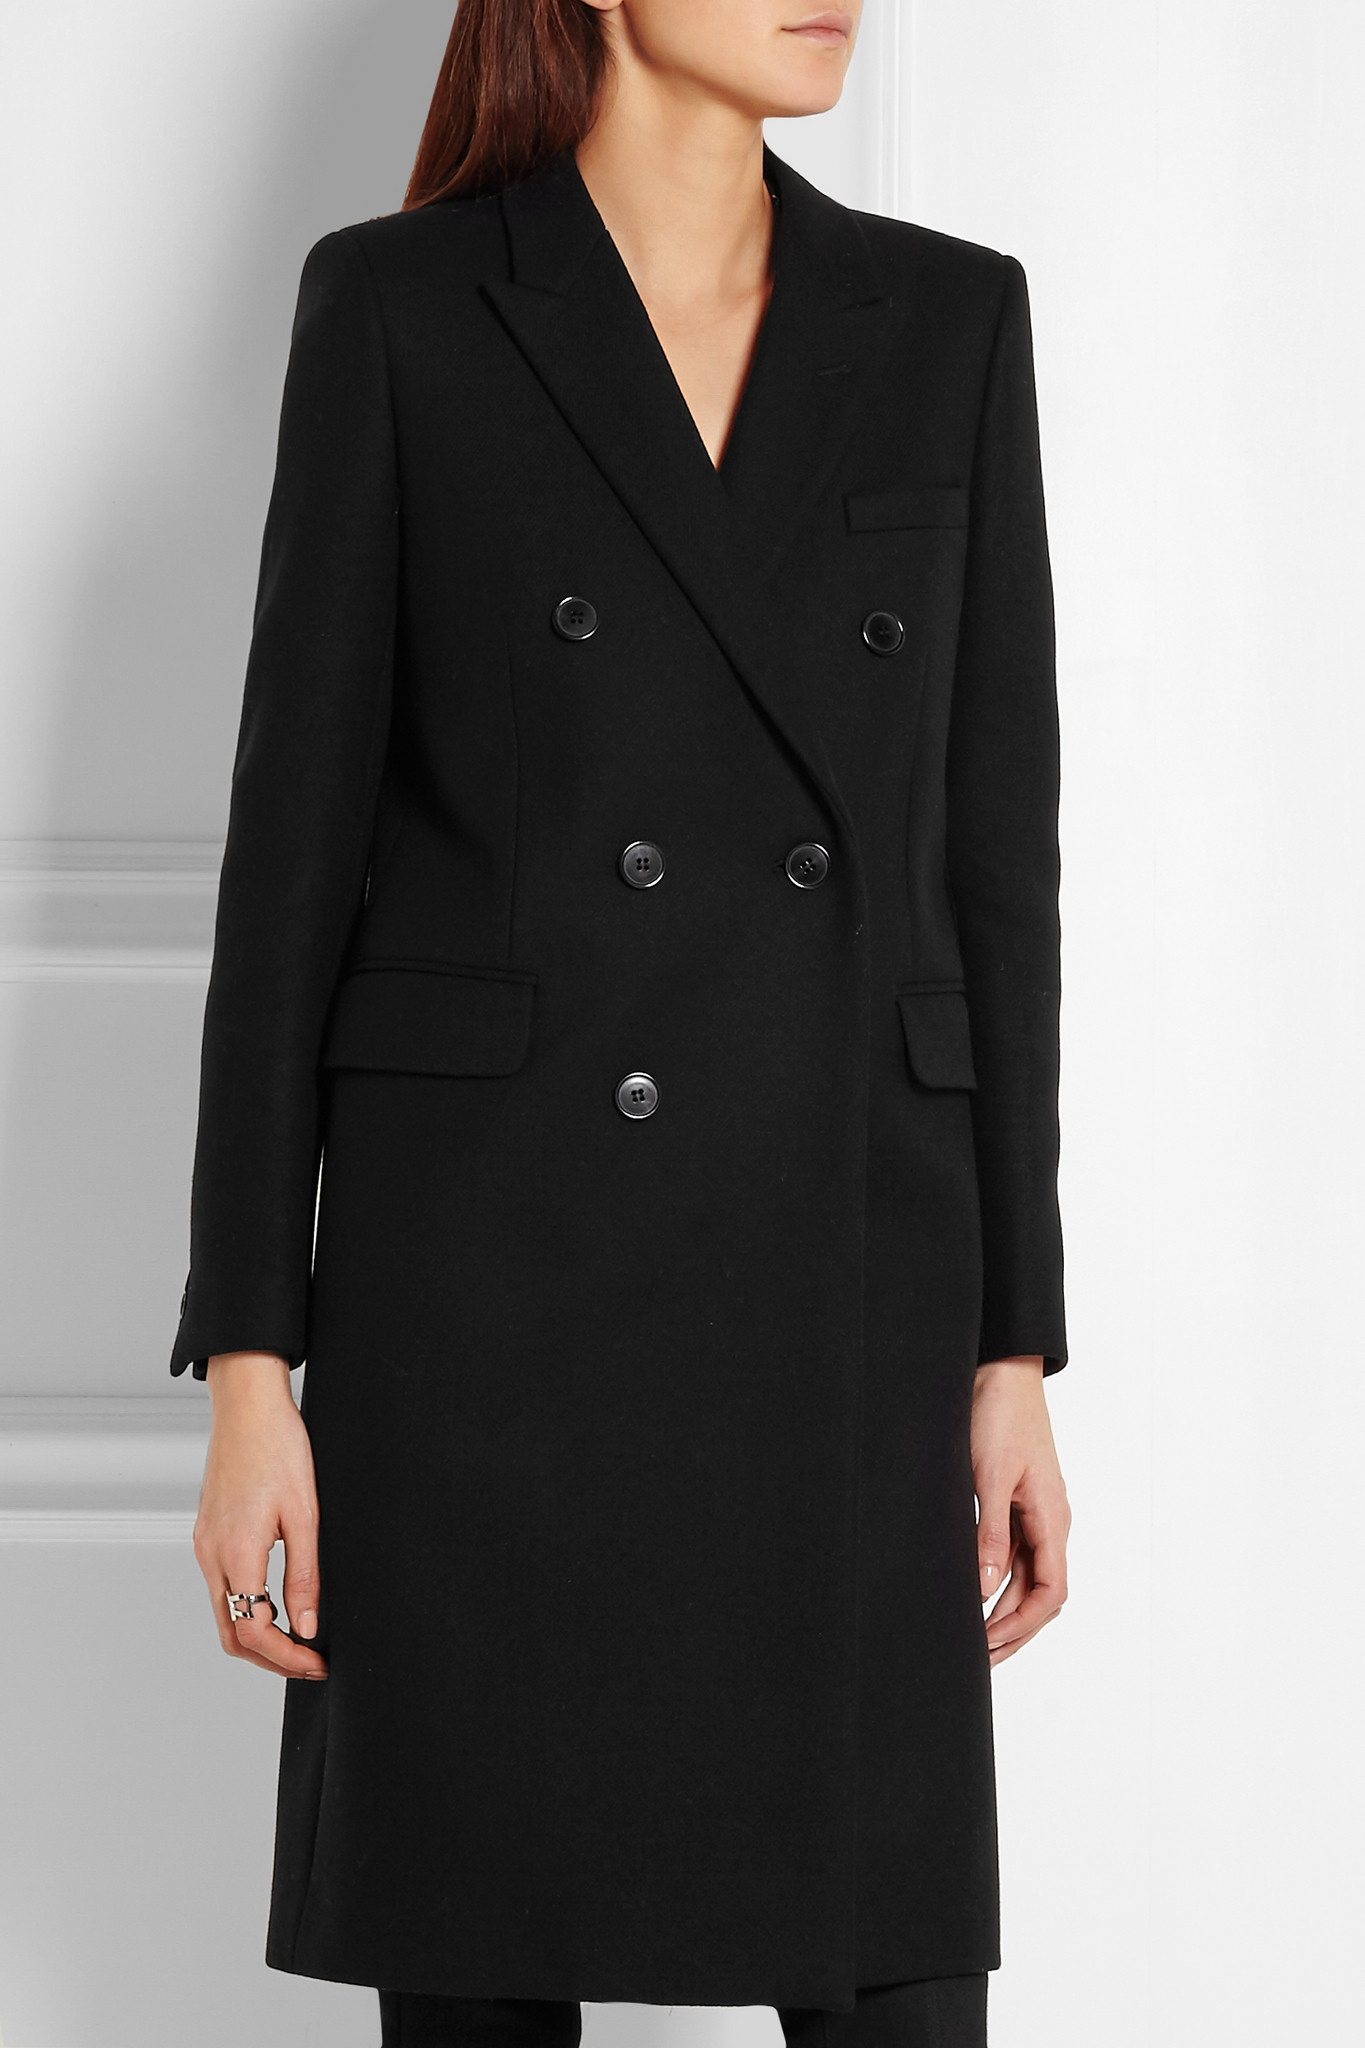 Lyst - Saint Laurent Double-breasted Wool-twill Coat in Black